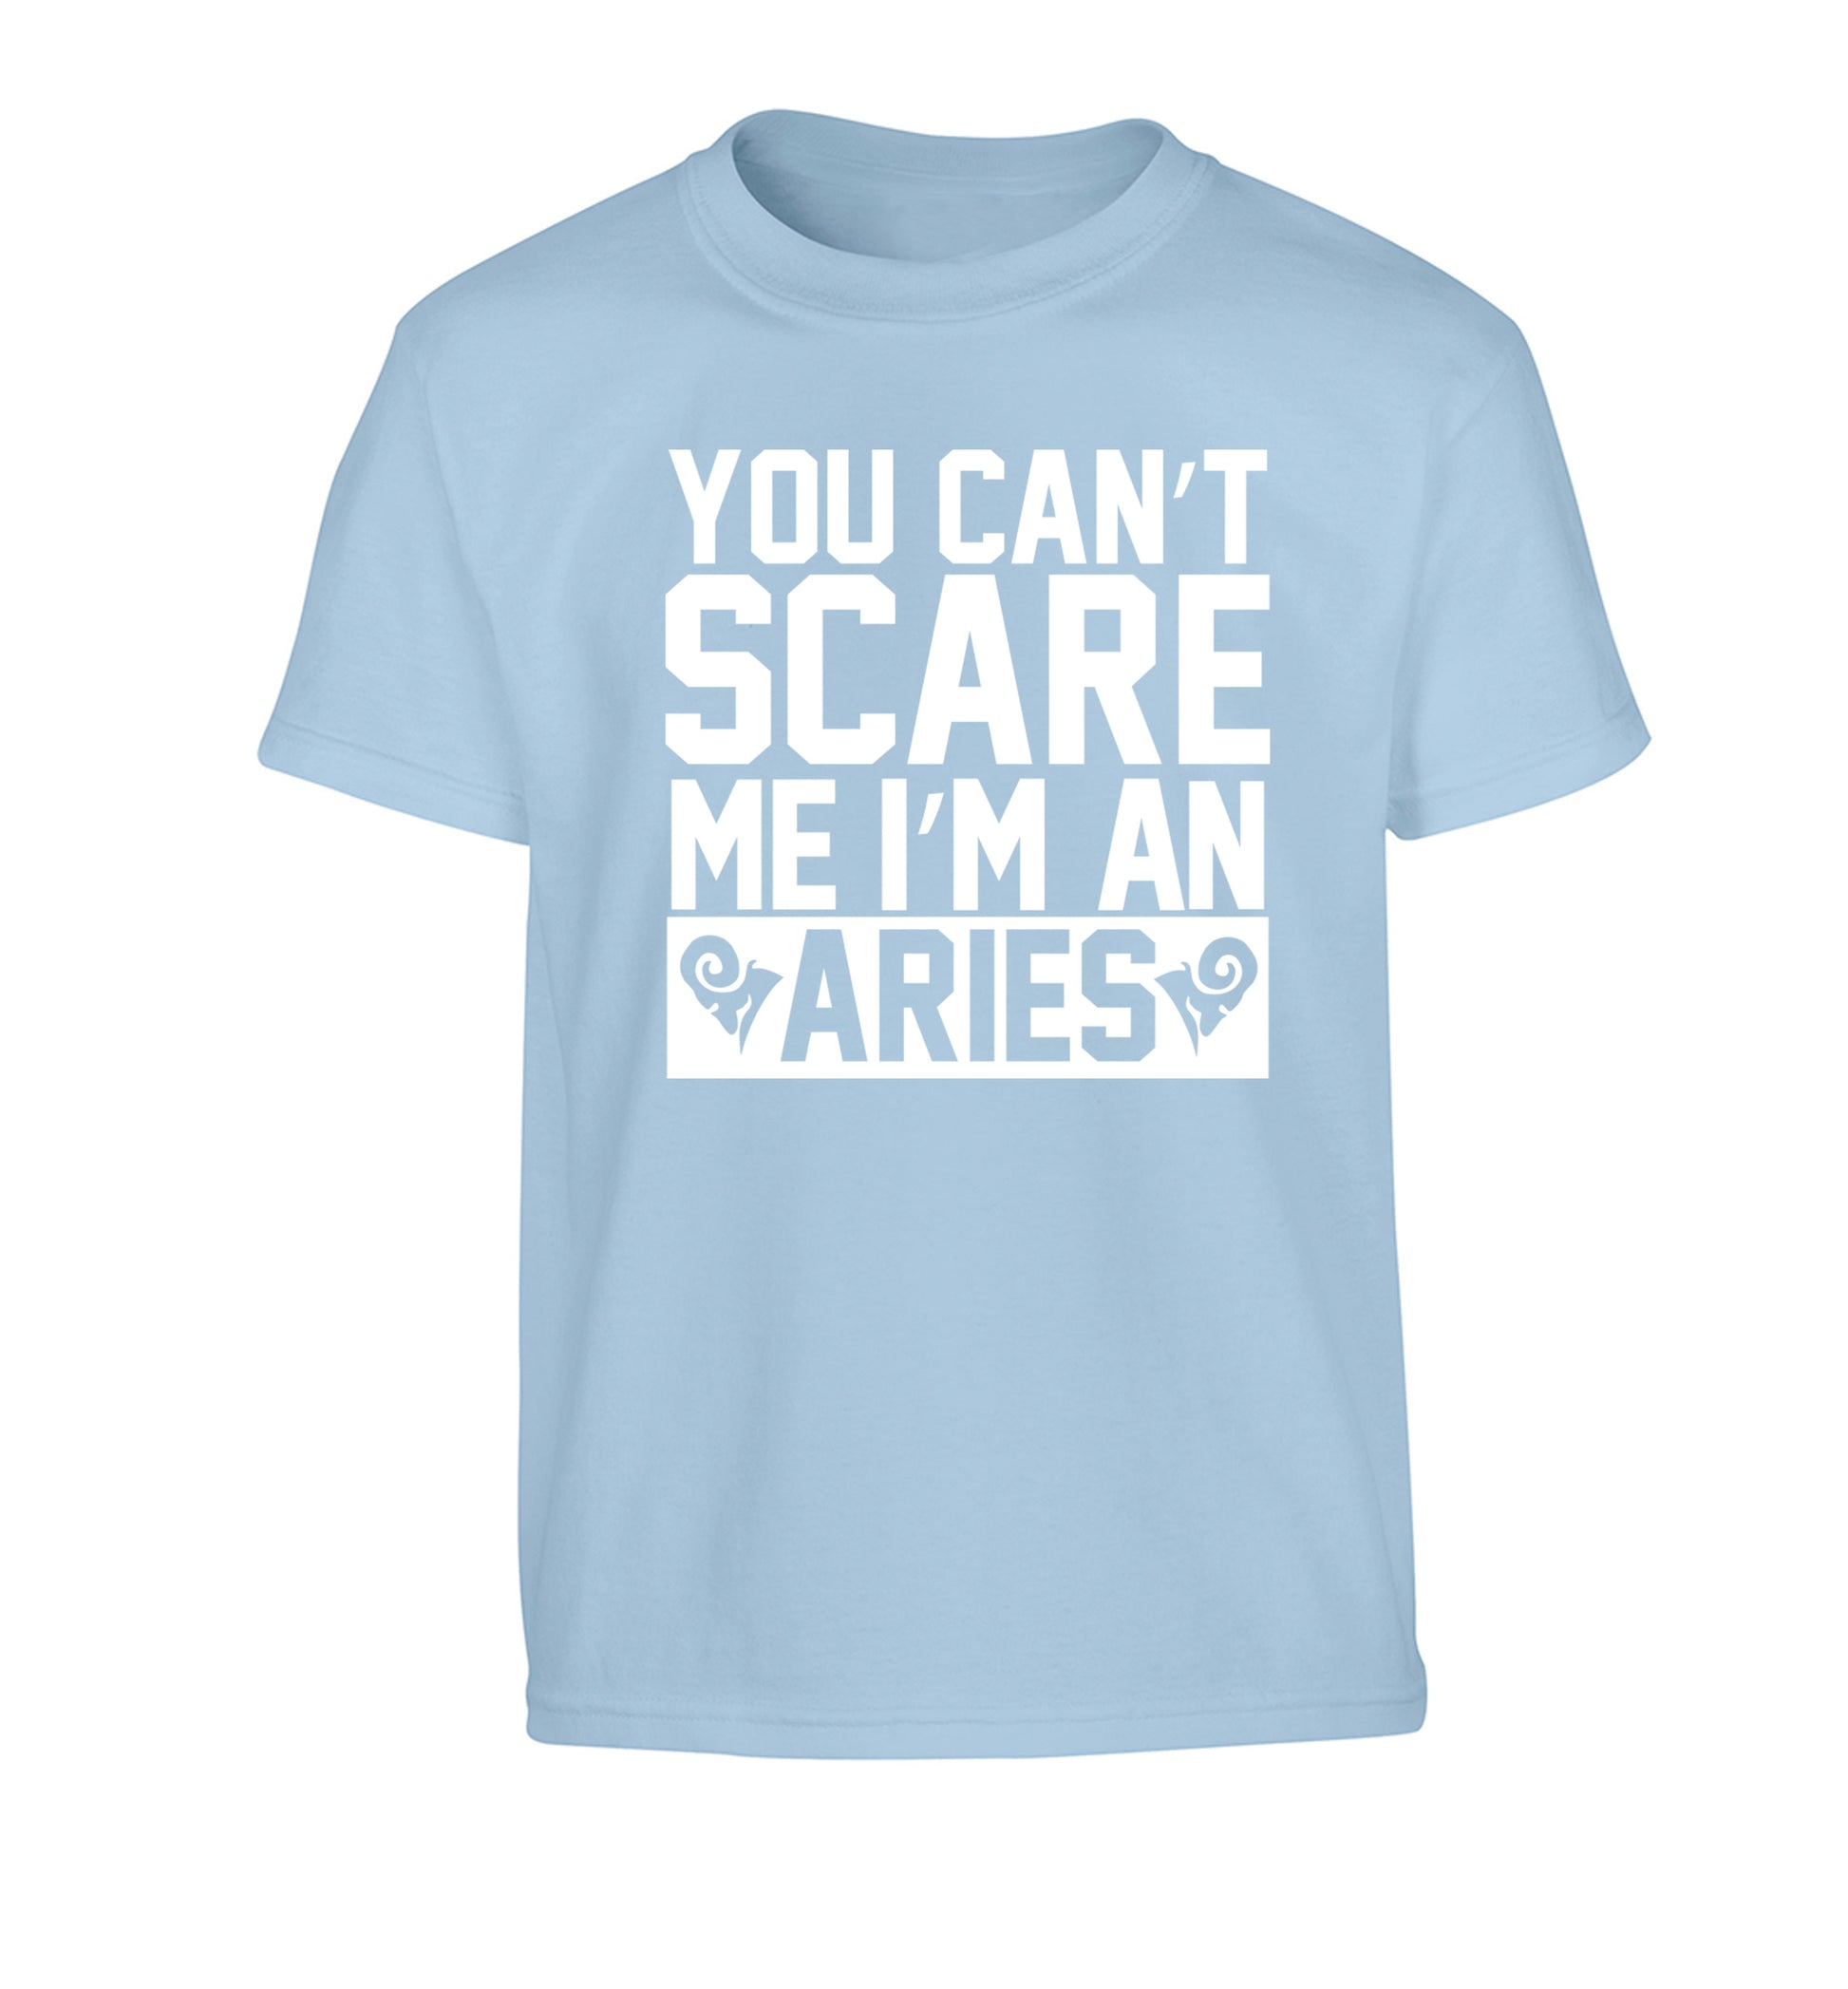 You can't scare me I'm an aries Children's light blue Tshirt 12-13 Years